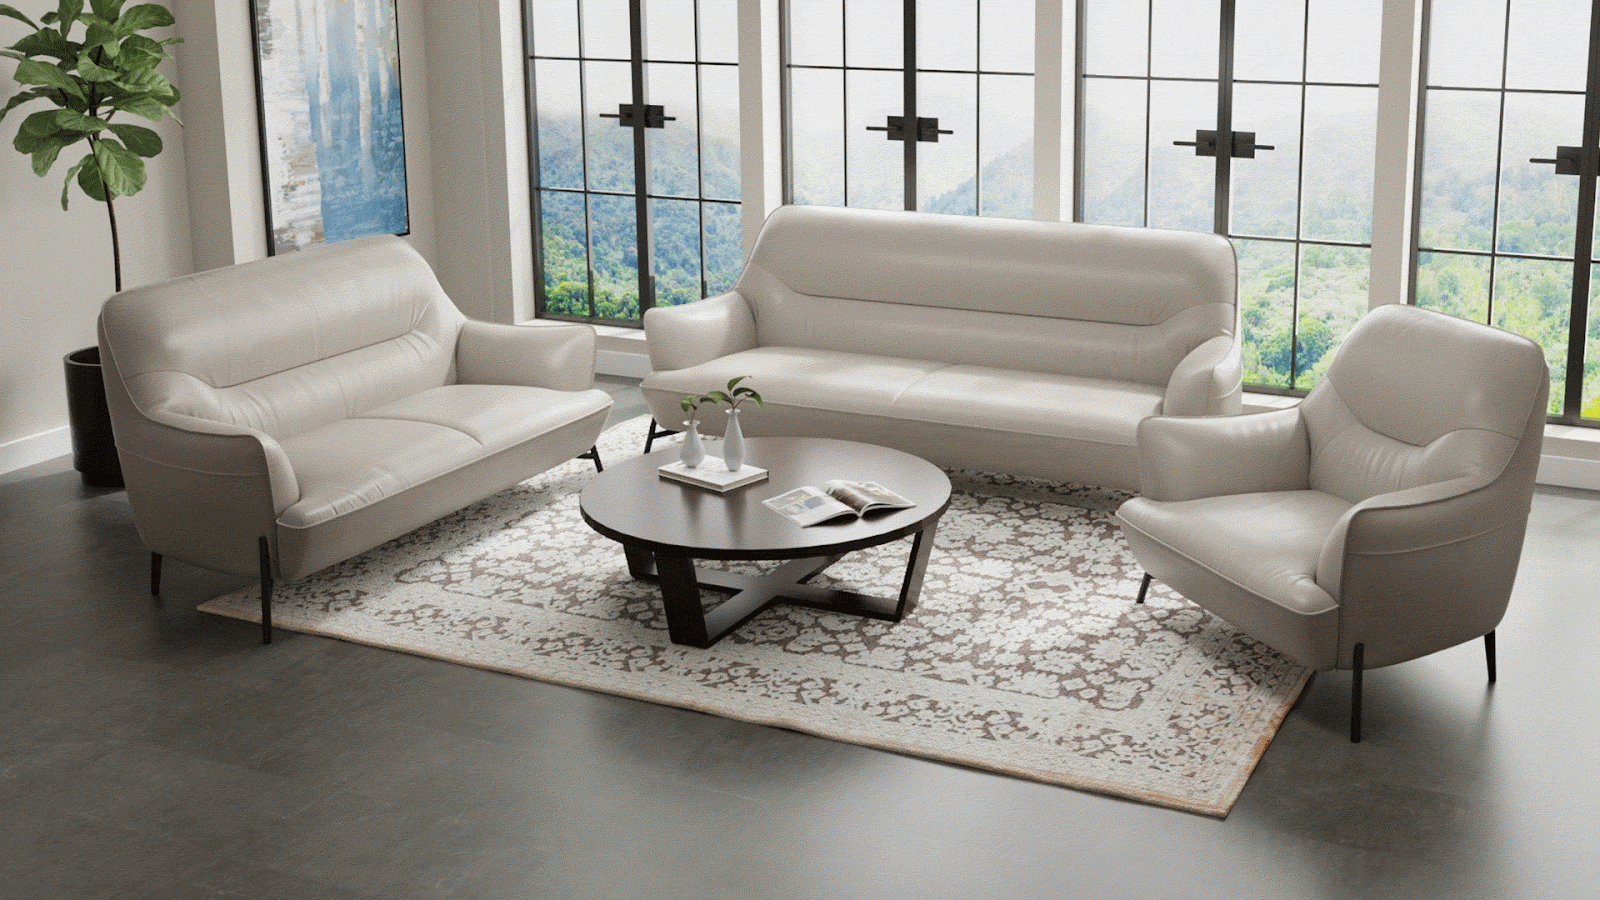 sofa set from multiple angles